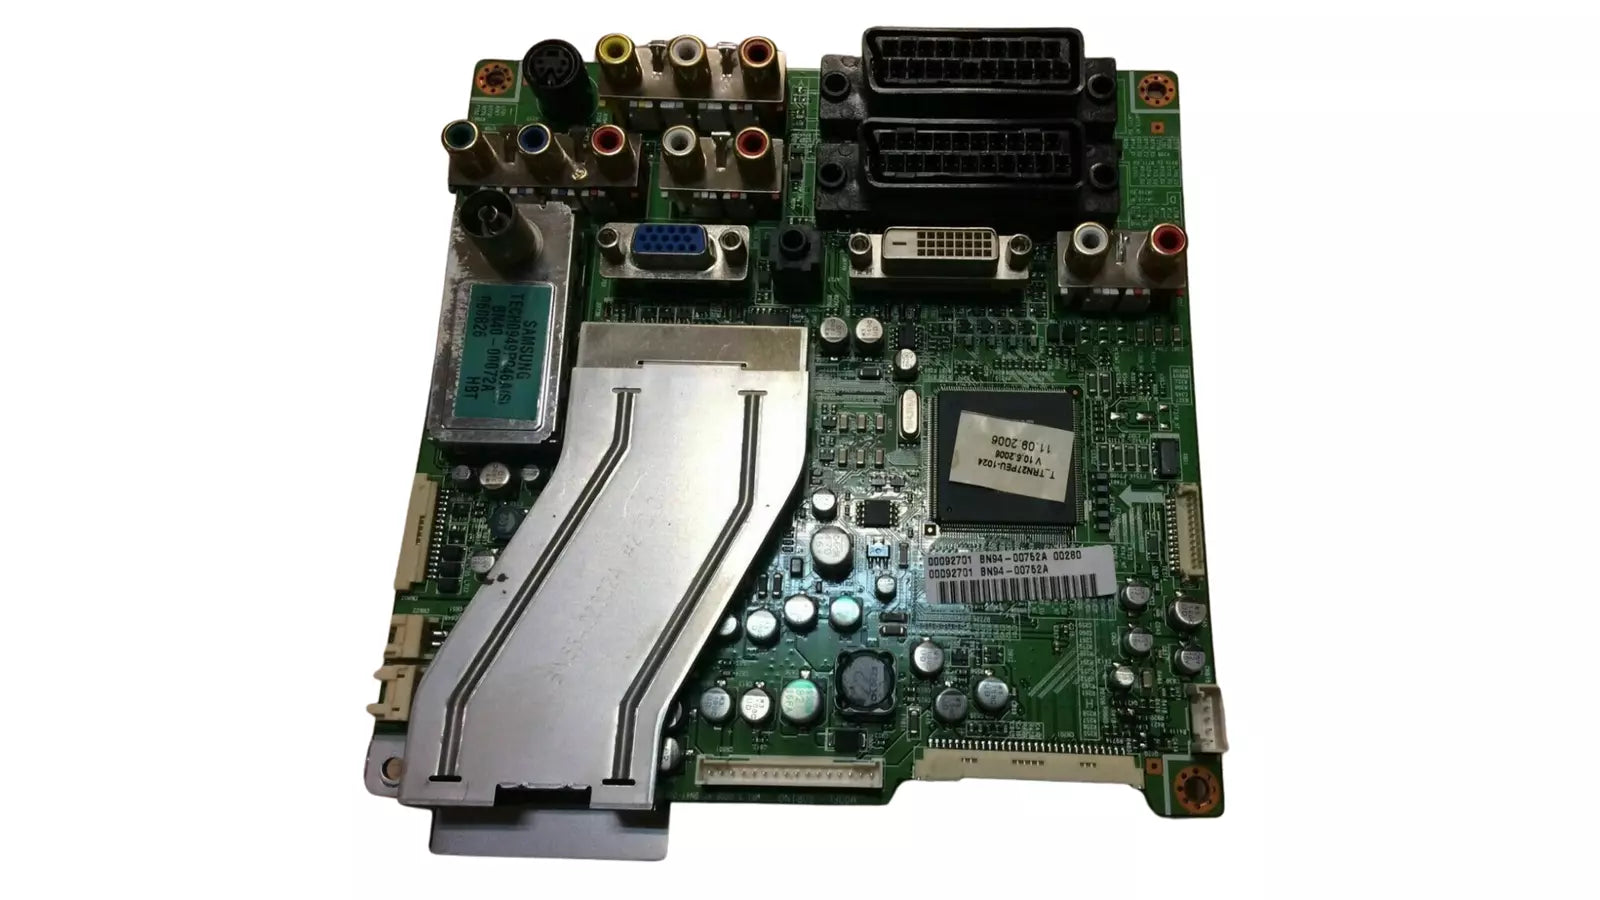 BN94-00752A Mainboard for Samsung TV